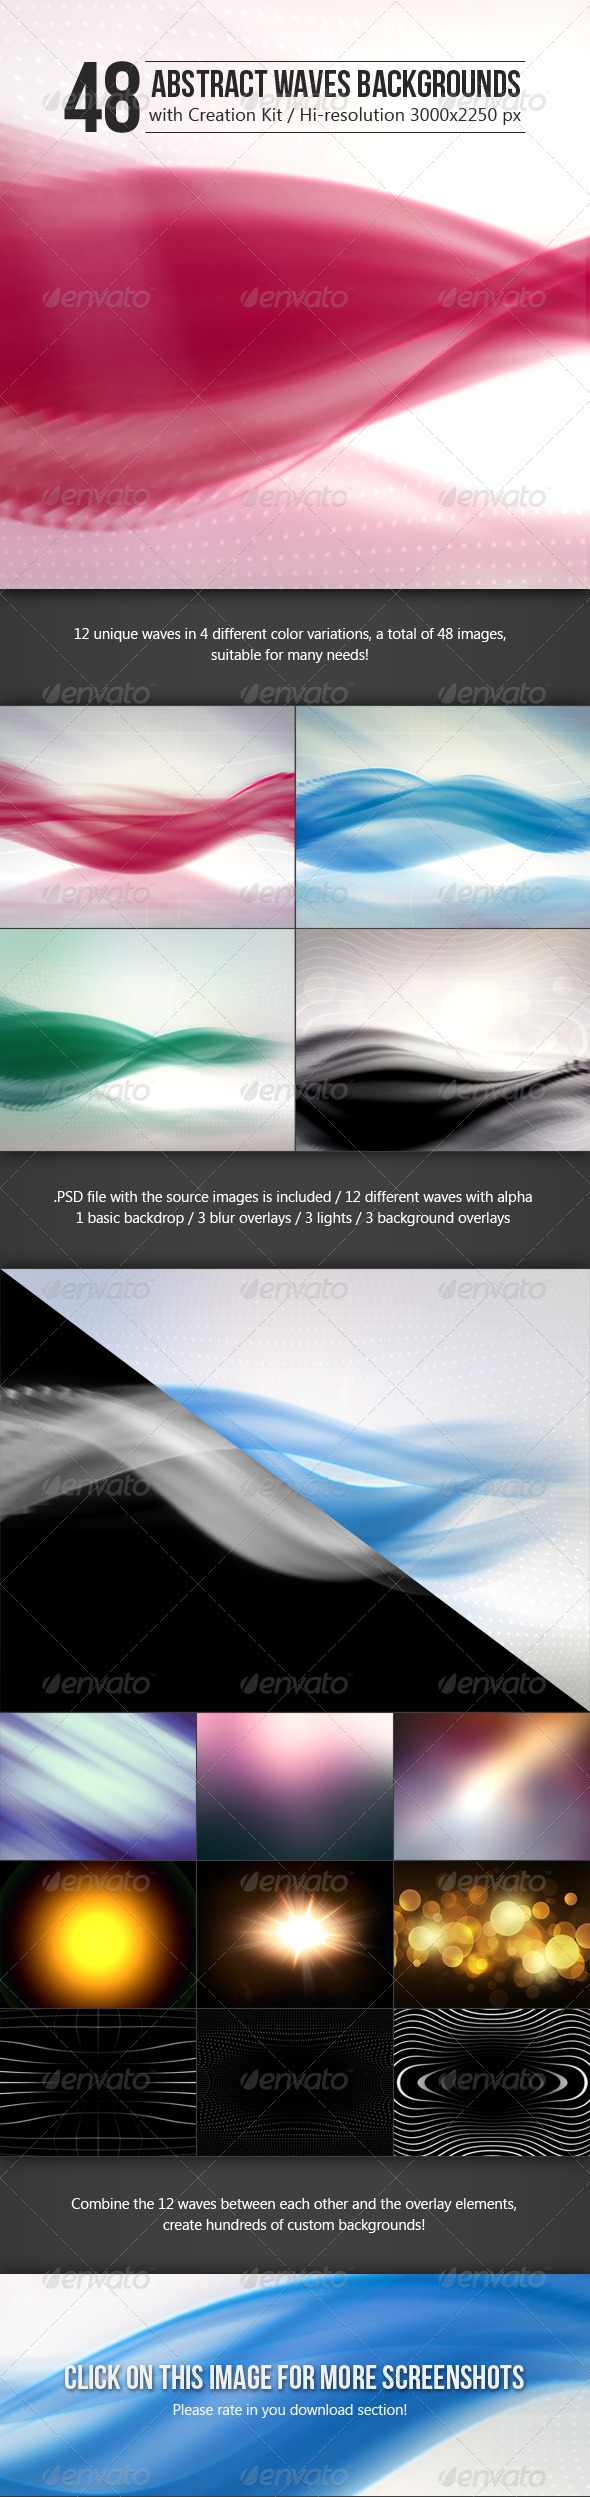 48 Abstract Waves Backgrounds with Creation Kit